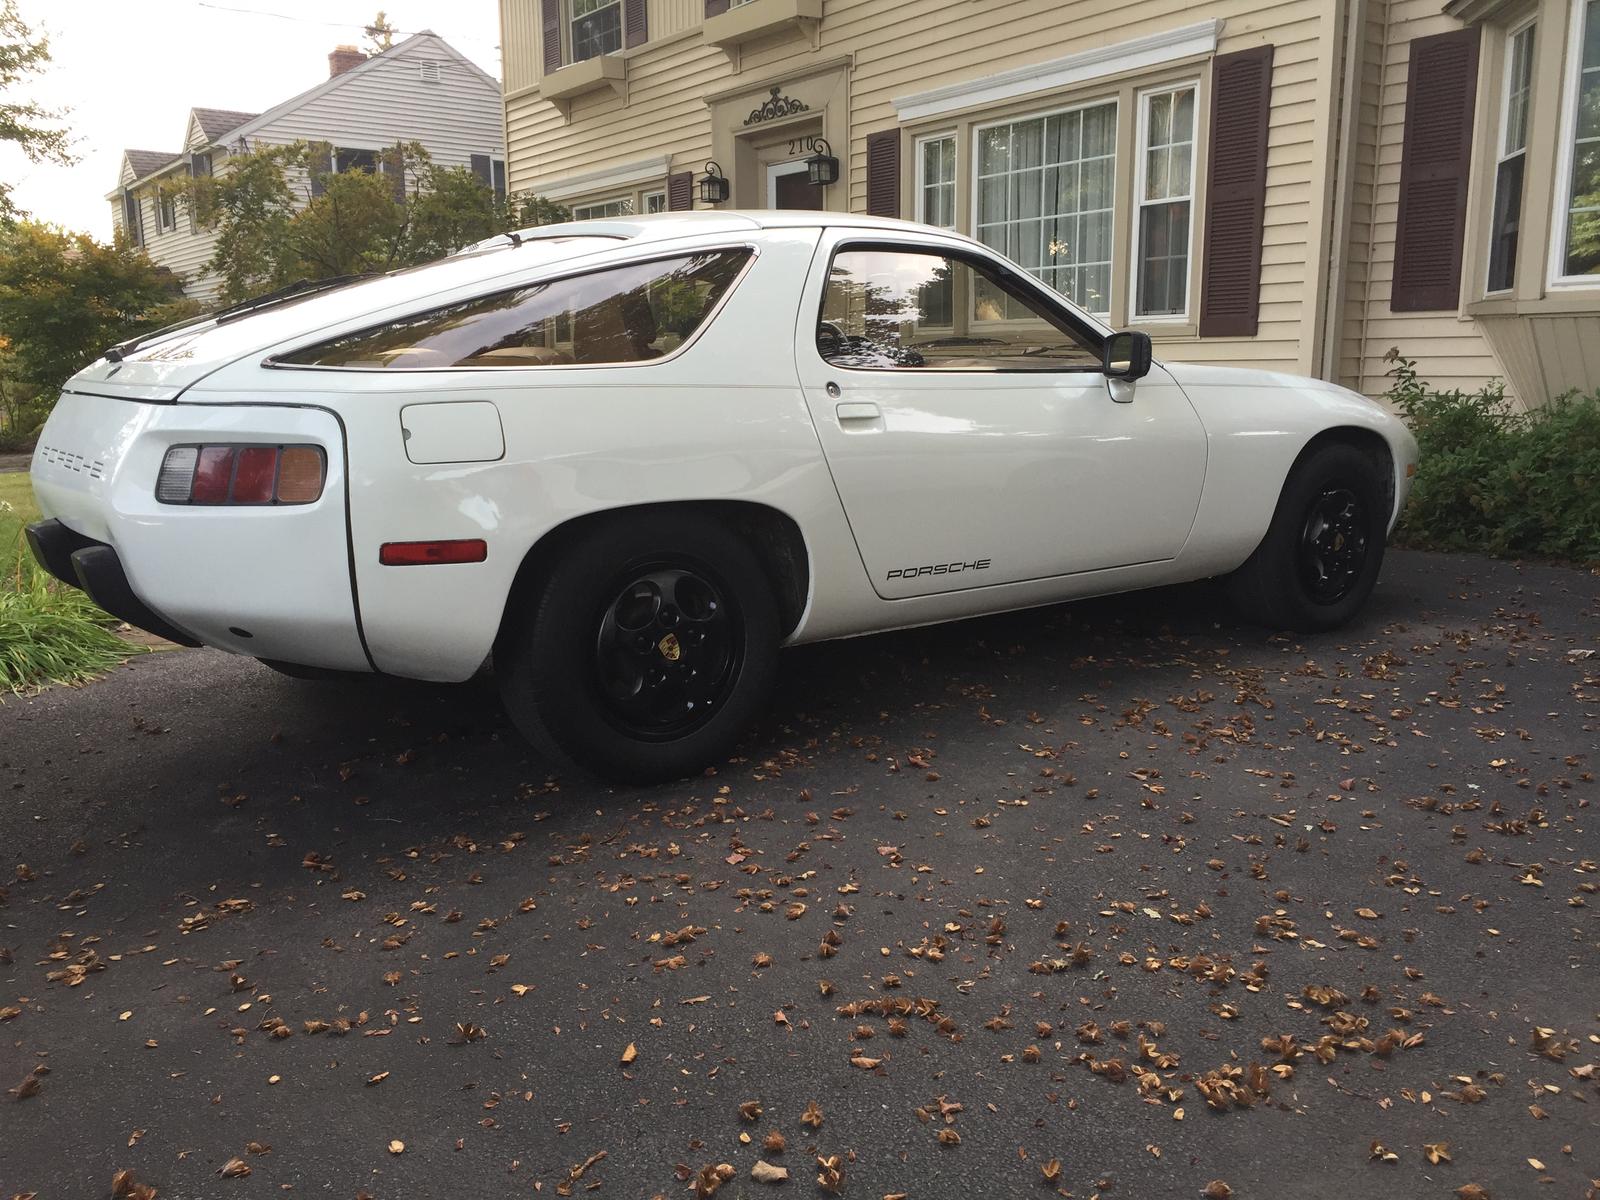 Official random 928 Picture Thread (post a new 928 pic or stay out